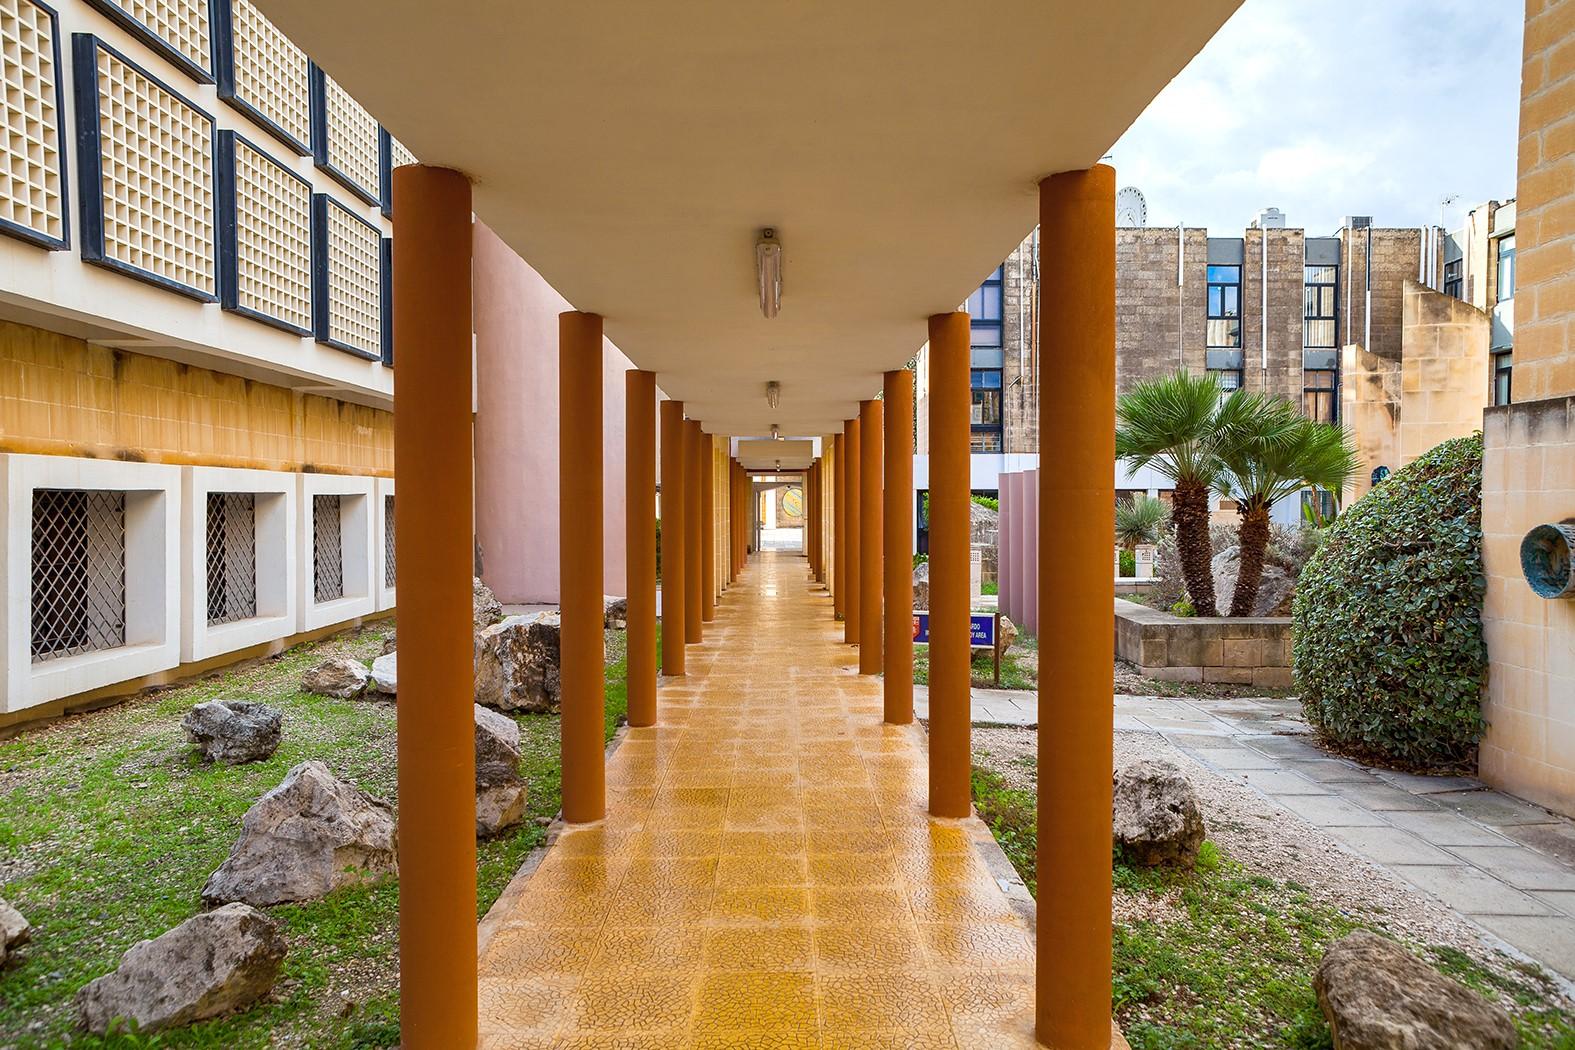 Heywood espouses, in this book, a social justice education and community engagement by universities. Pictured is a path within the University of Malta. Photo: Shutterstock.com